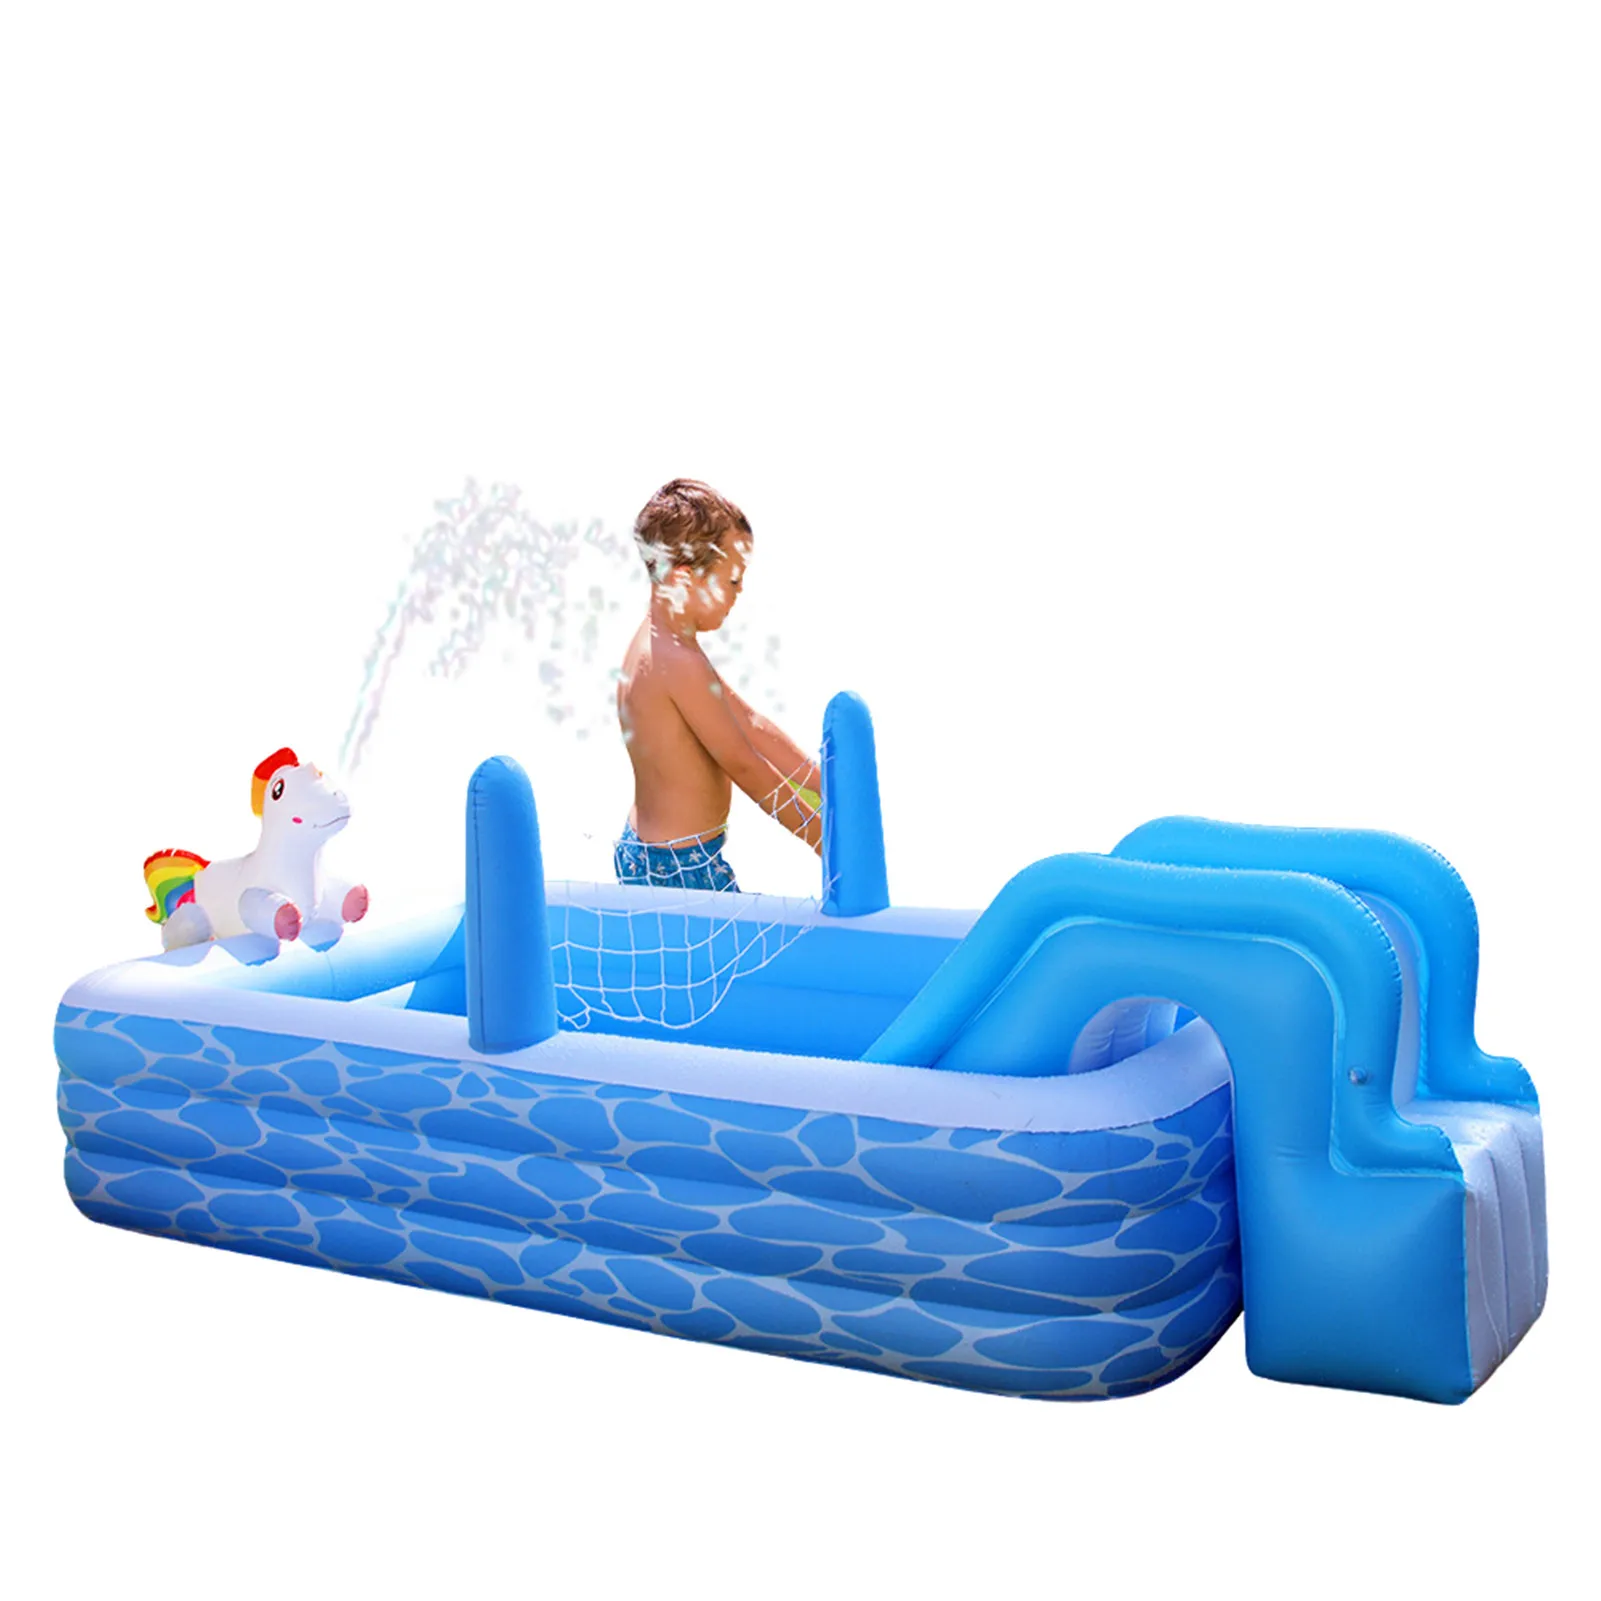 Blow Up Inflatable Pool Blow Up Swimming Pool Multi Functions with Sprinkler Slide Net Summer Outdoor Lounge Pool Water Park Pla